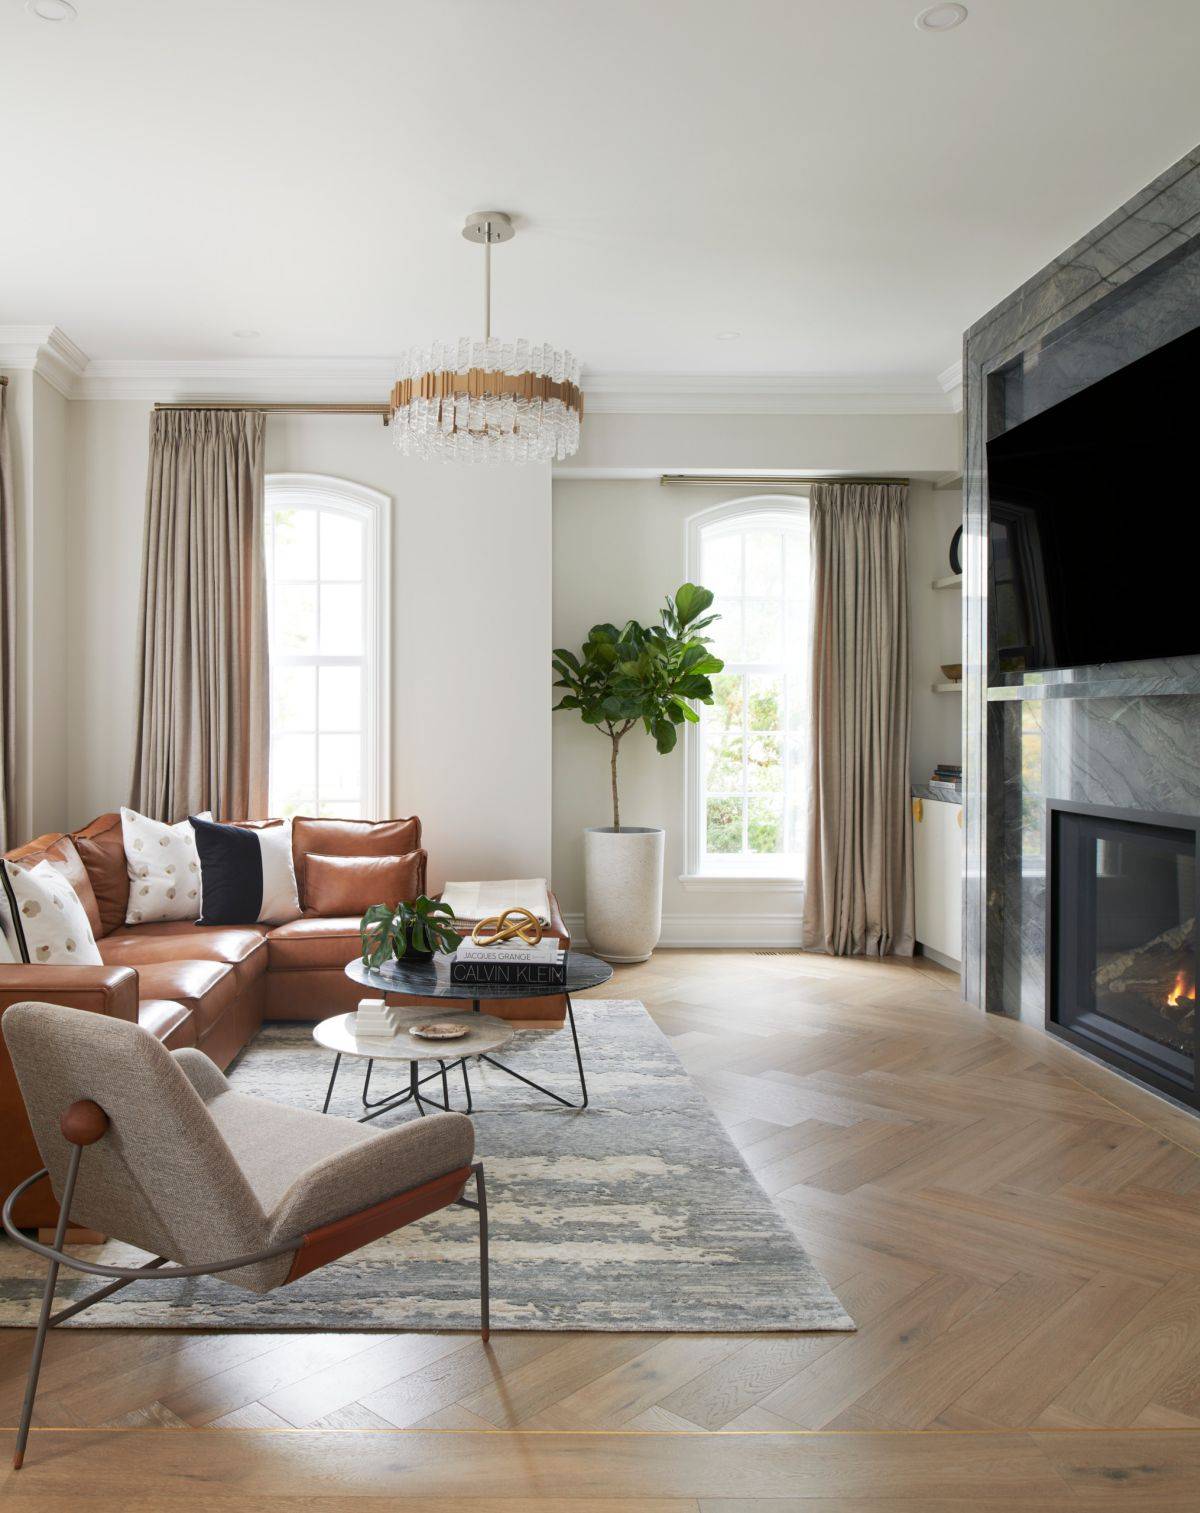 Fireplace-is-the-focal-point-of-this-contemporary-family-room-12606